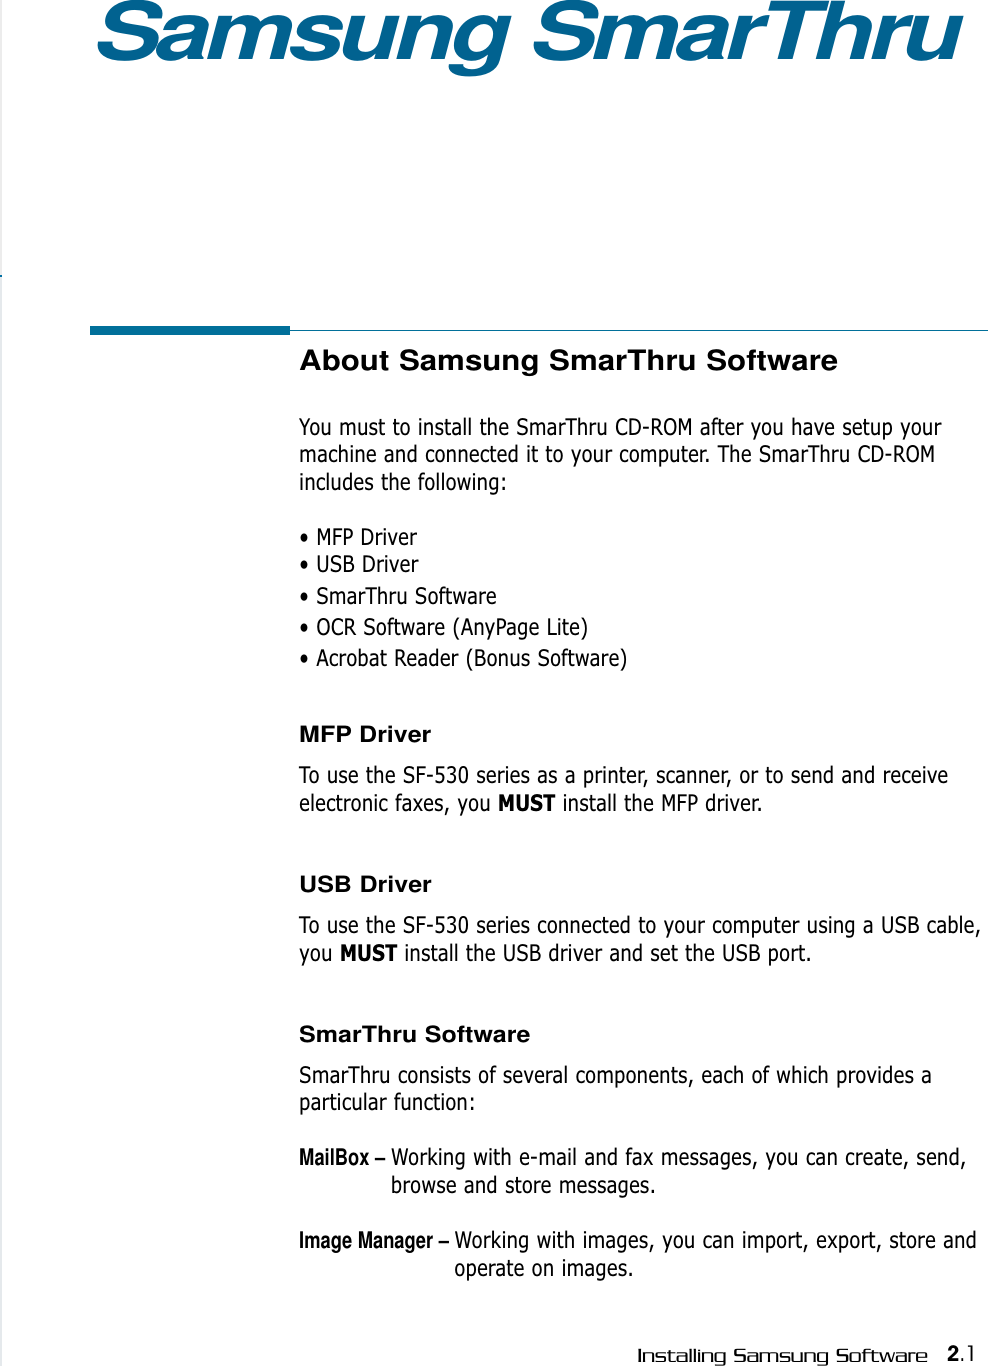 2.1Installing Samsung SoftwareAbout Samsung SmarThru SoftwareYou must to install the SmarThru CD-ROM after you have setup yourmachine and connected it to your computer. The SmarThru CD-ROMincludes the following:• MFP Driver• USB Driver• SmarThru Software• OCR Software (AnyPage Lite)• Acrobat Reader (Bonus Software)MFP Driver To use the SF-530 series as a printer, scanner, or to send and receiveelectronic faxes, you MUST install the MFP driver.USB Driver To use the SF-530 series connected to your computer using a USB cable,you MUST install the USB driver and set the USB port.SmarThru SoftwareSmarThru consists of several components, each of which provides aparticular function:MailBox – Working with e-mail and fax messages, you can create, send,browse and store messages.Image Manager – Working with images, you can import, export, store andoperate on images.Samsung SmarThru